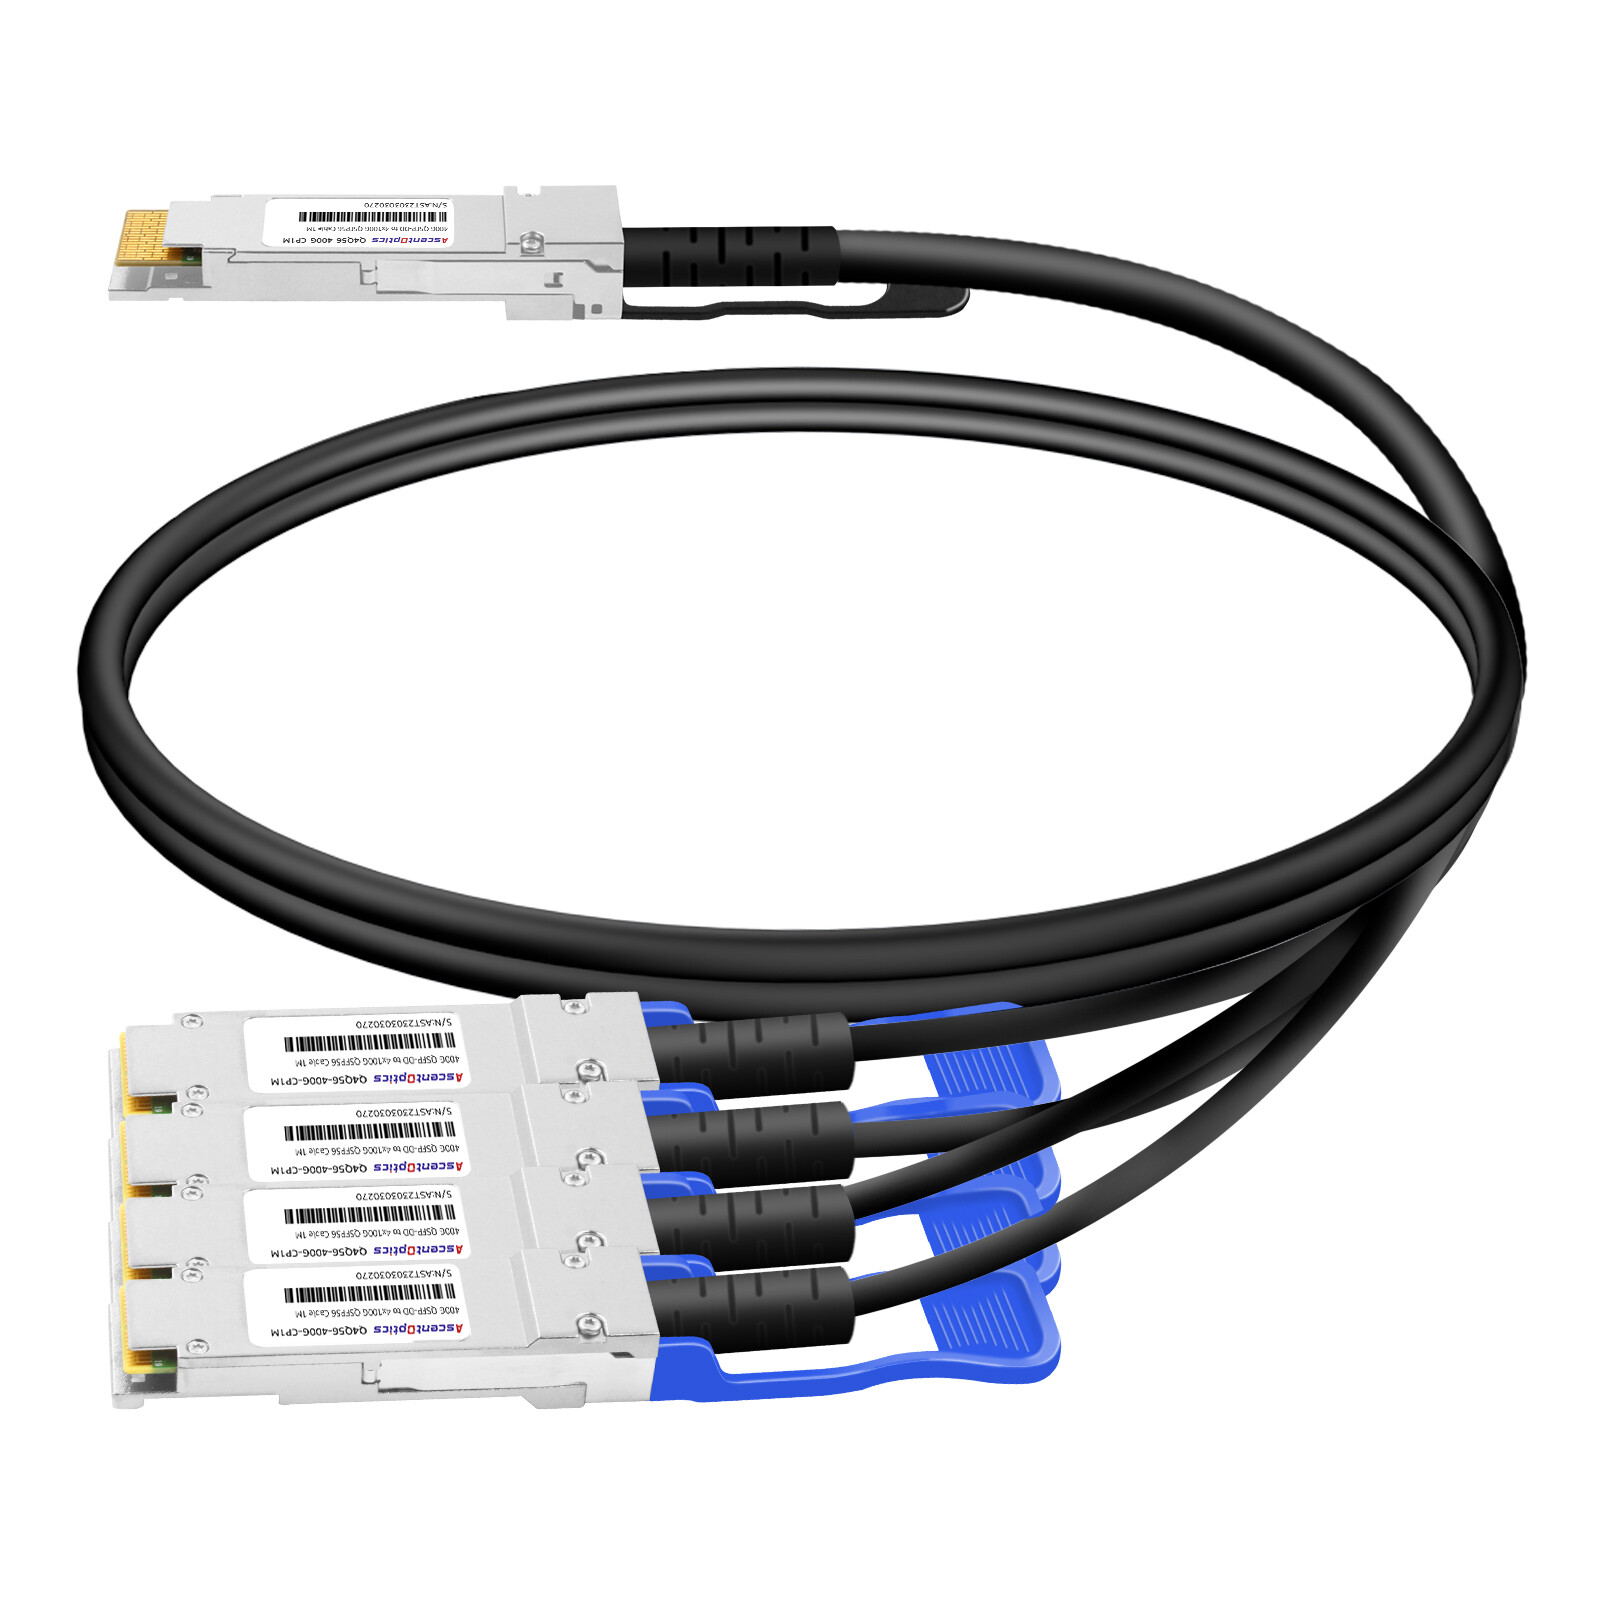 400G QSFP-DD to 4x 100G QSFP56 Copper Breakout Cable,1 Meter,Passive